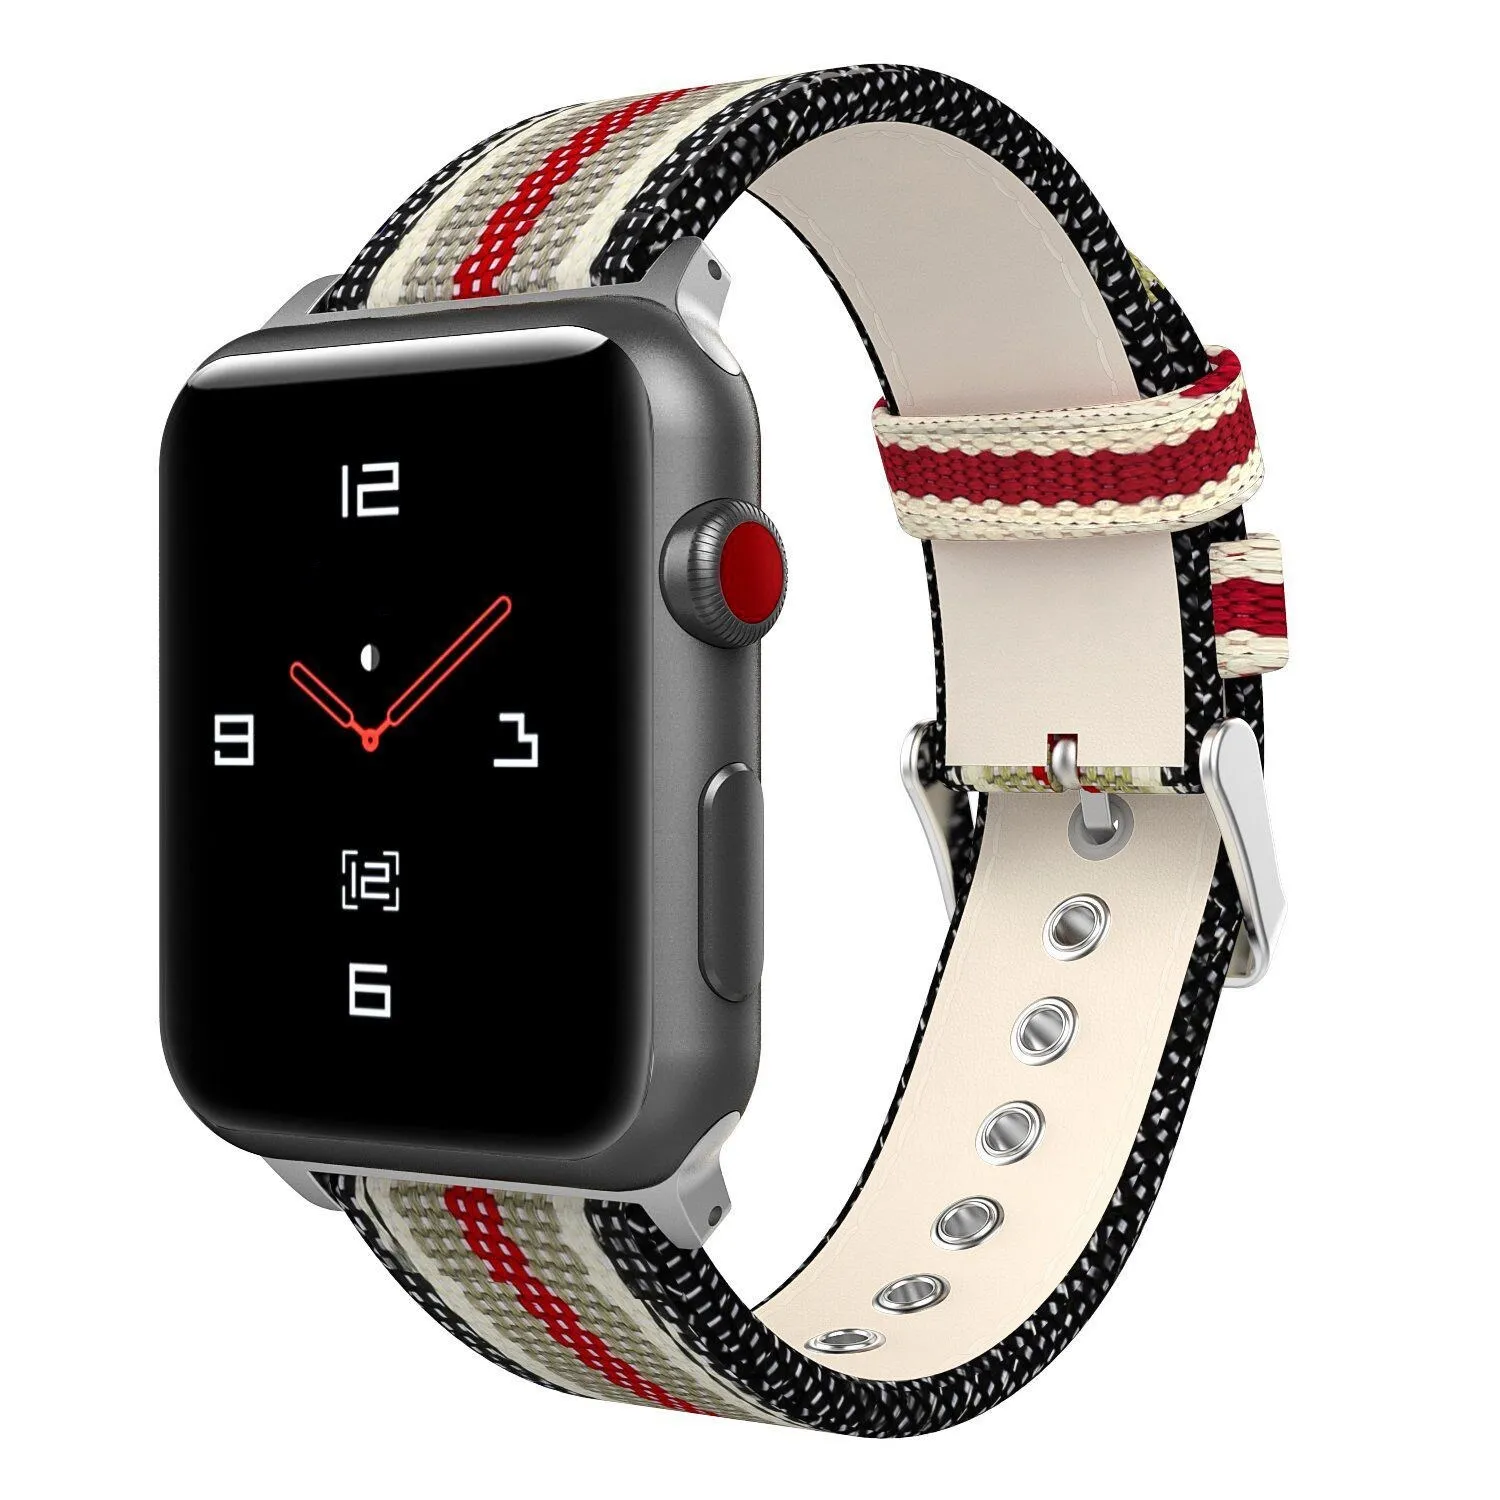 Flag Pattern Style Nylon Leather Band for Apple Watch 38mm 42mm Leather Watchband iWatch 40mm 44mm Nylon Strap Series 2 3 4 5